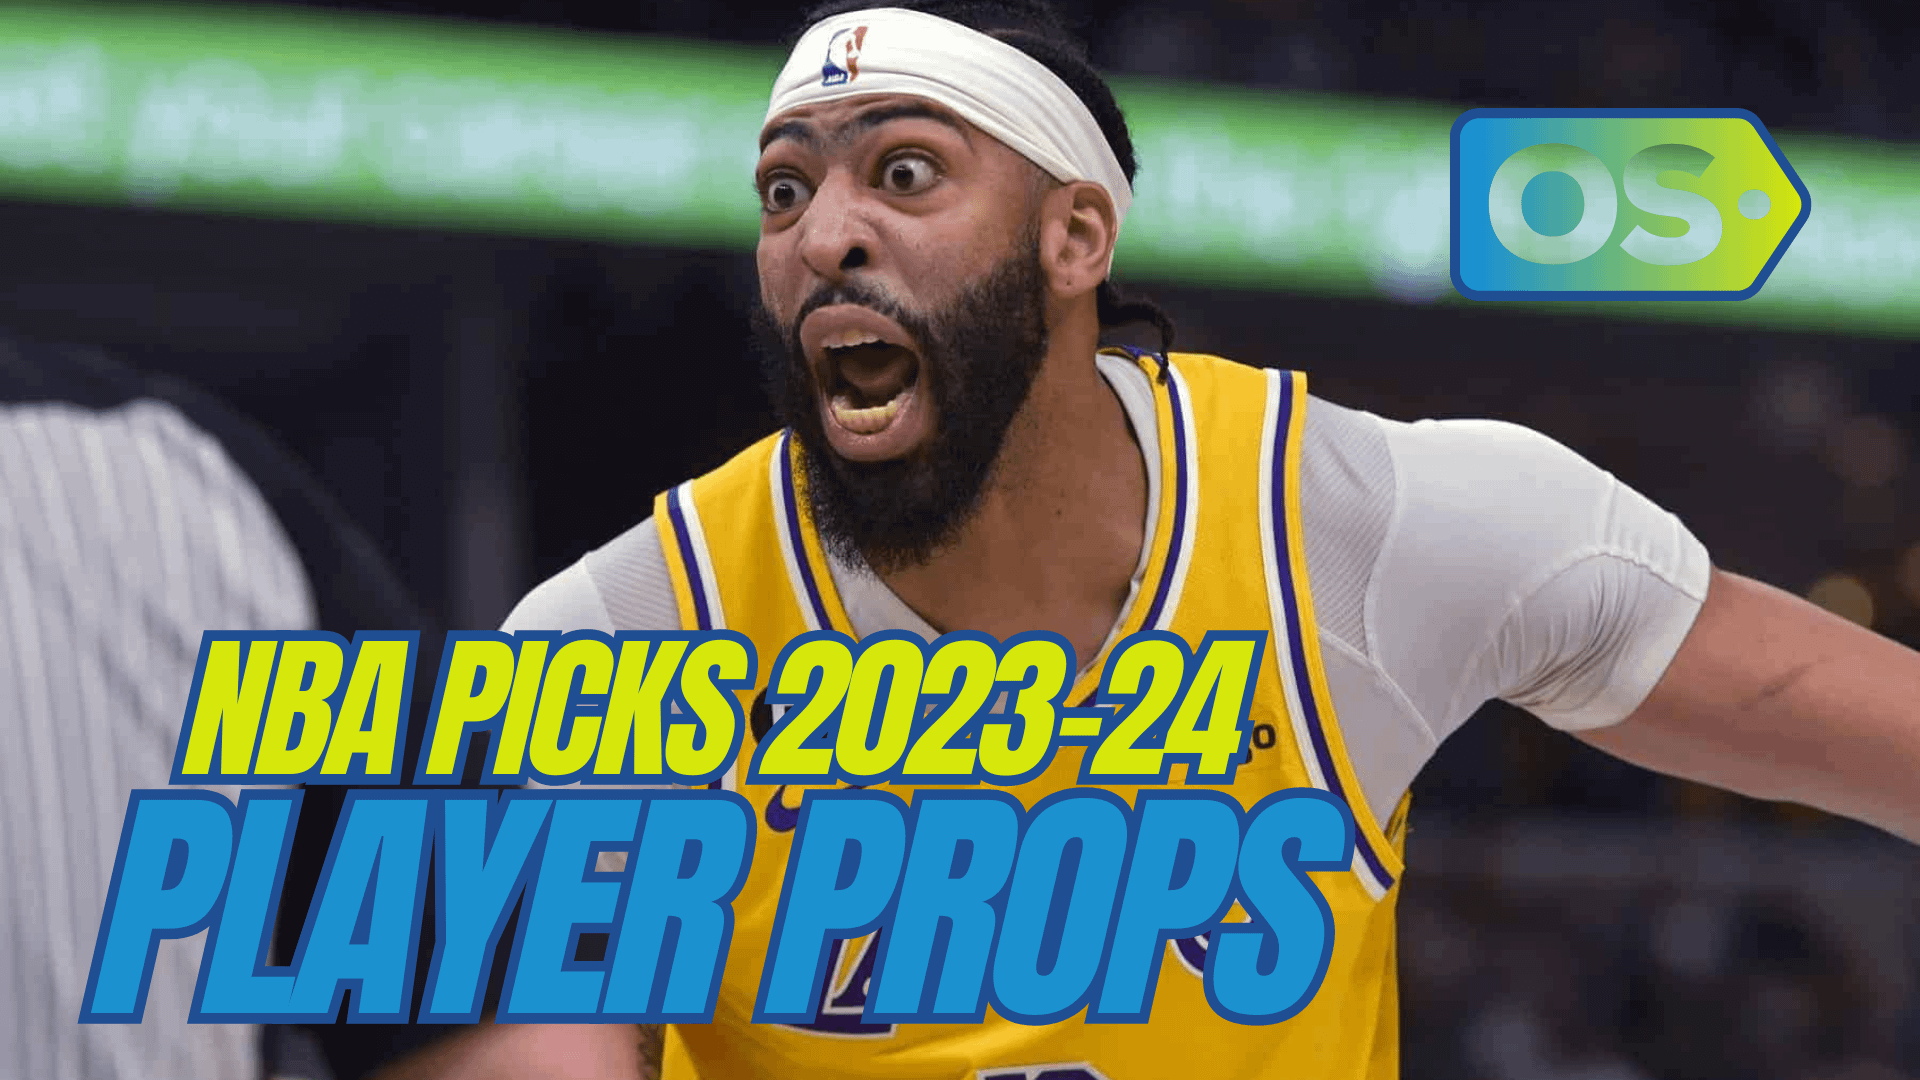 The best NBA player prop bets and picks today for Friday, January 19, include wagers on Anthony Davis and Dejounte Murray.